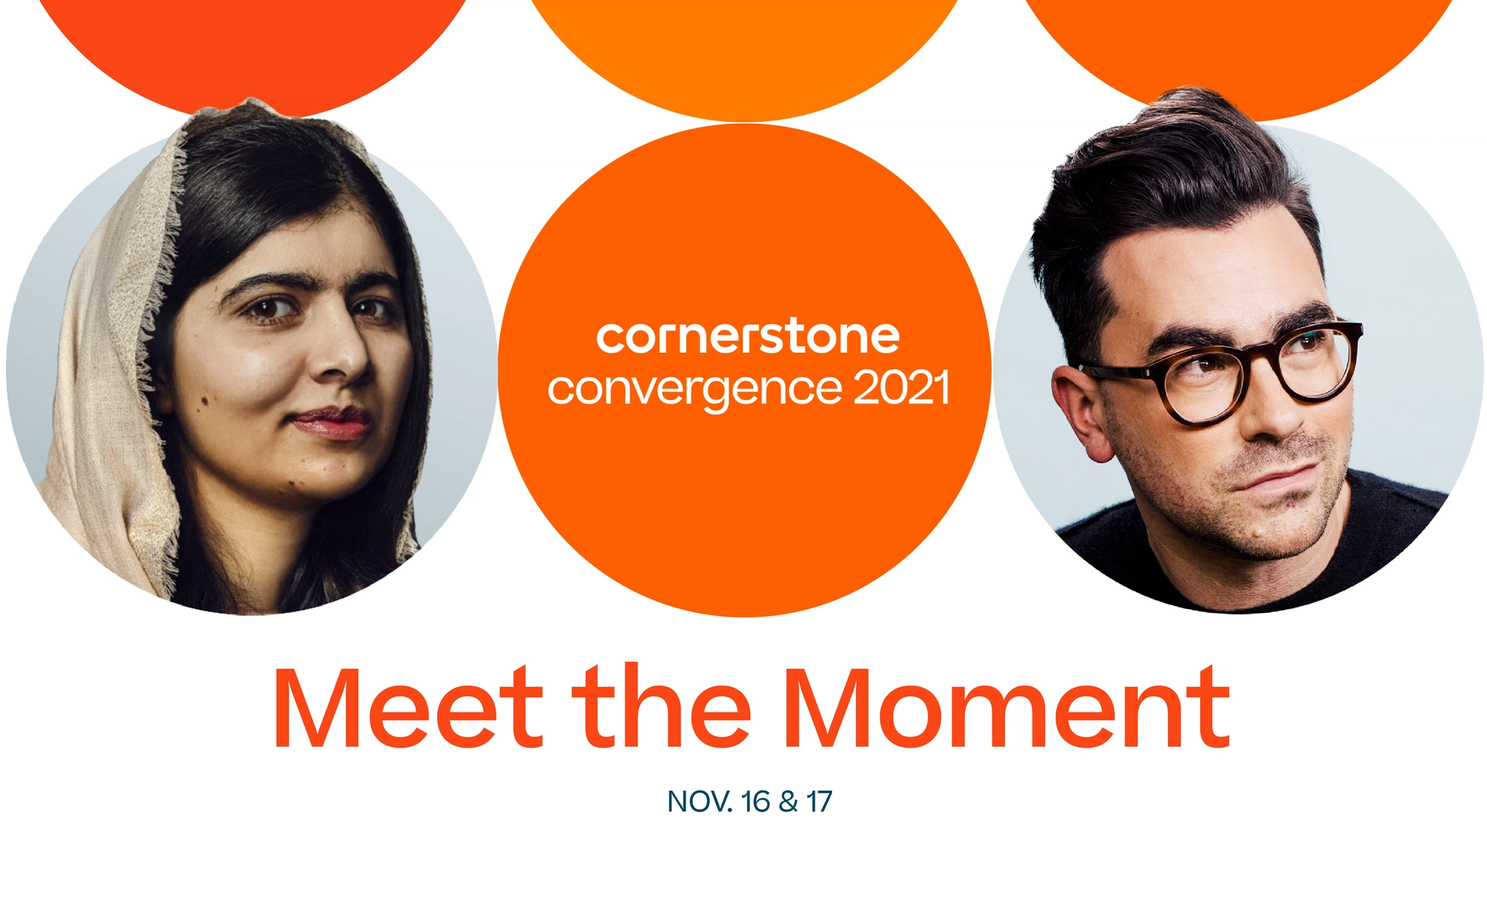 Announcing the Convergence 2021 featured speakers: Dan Levy and Malala Yousafzai